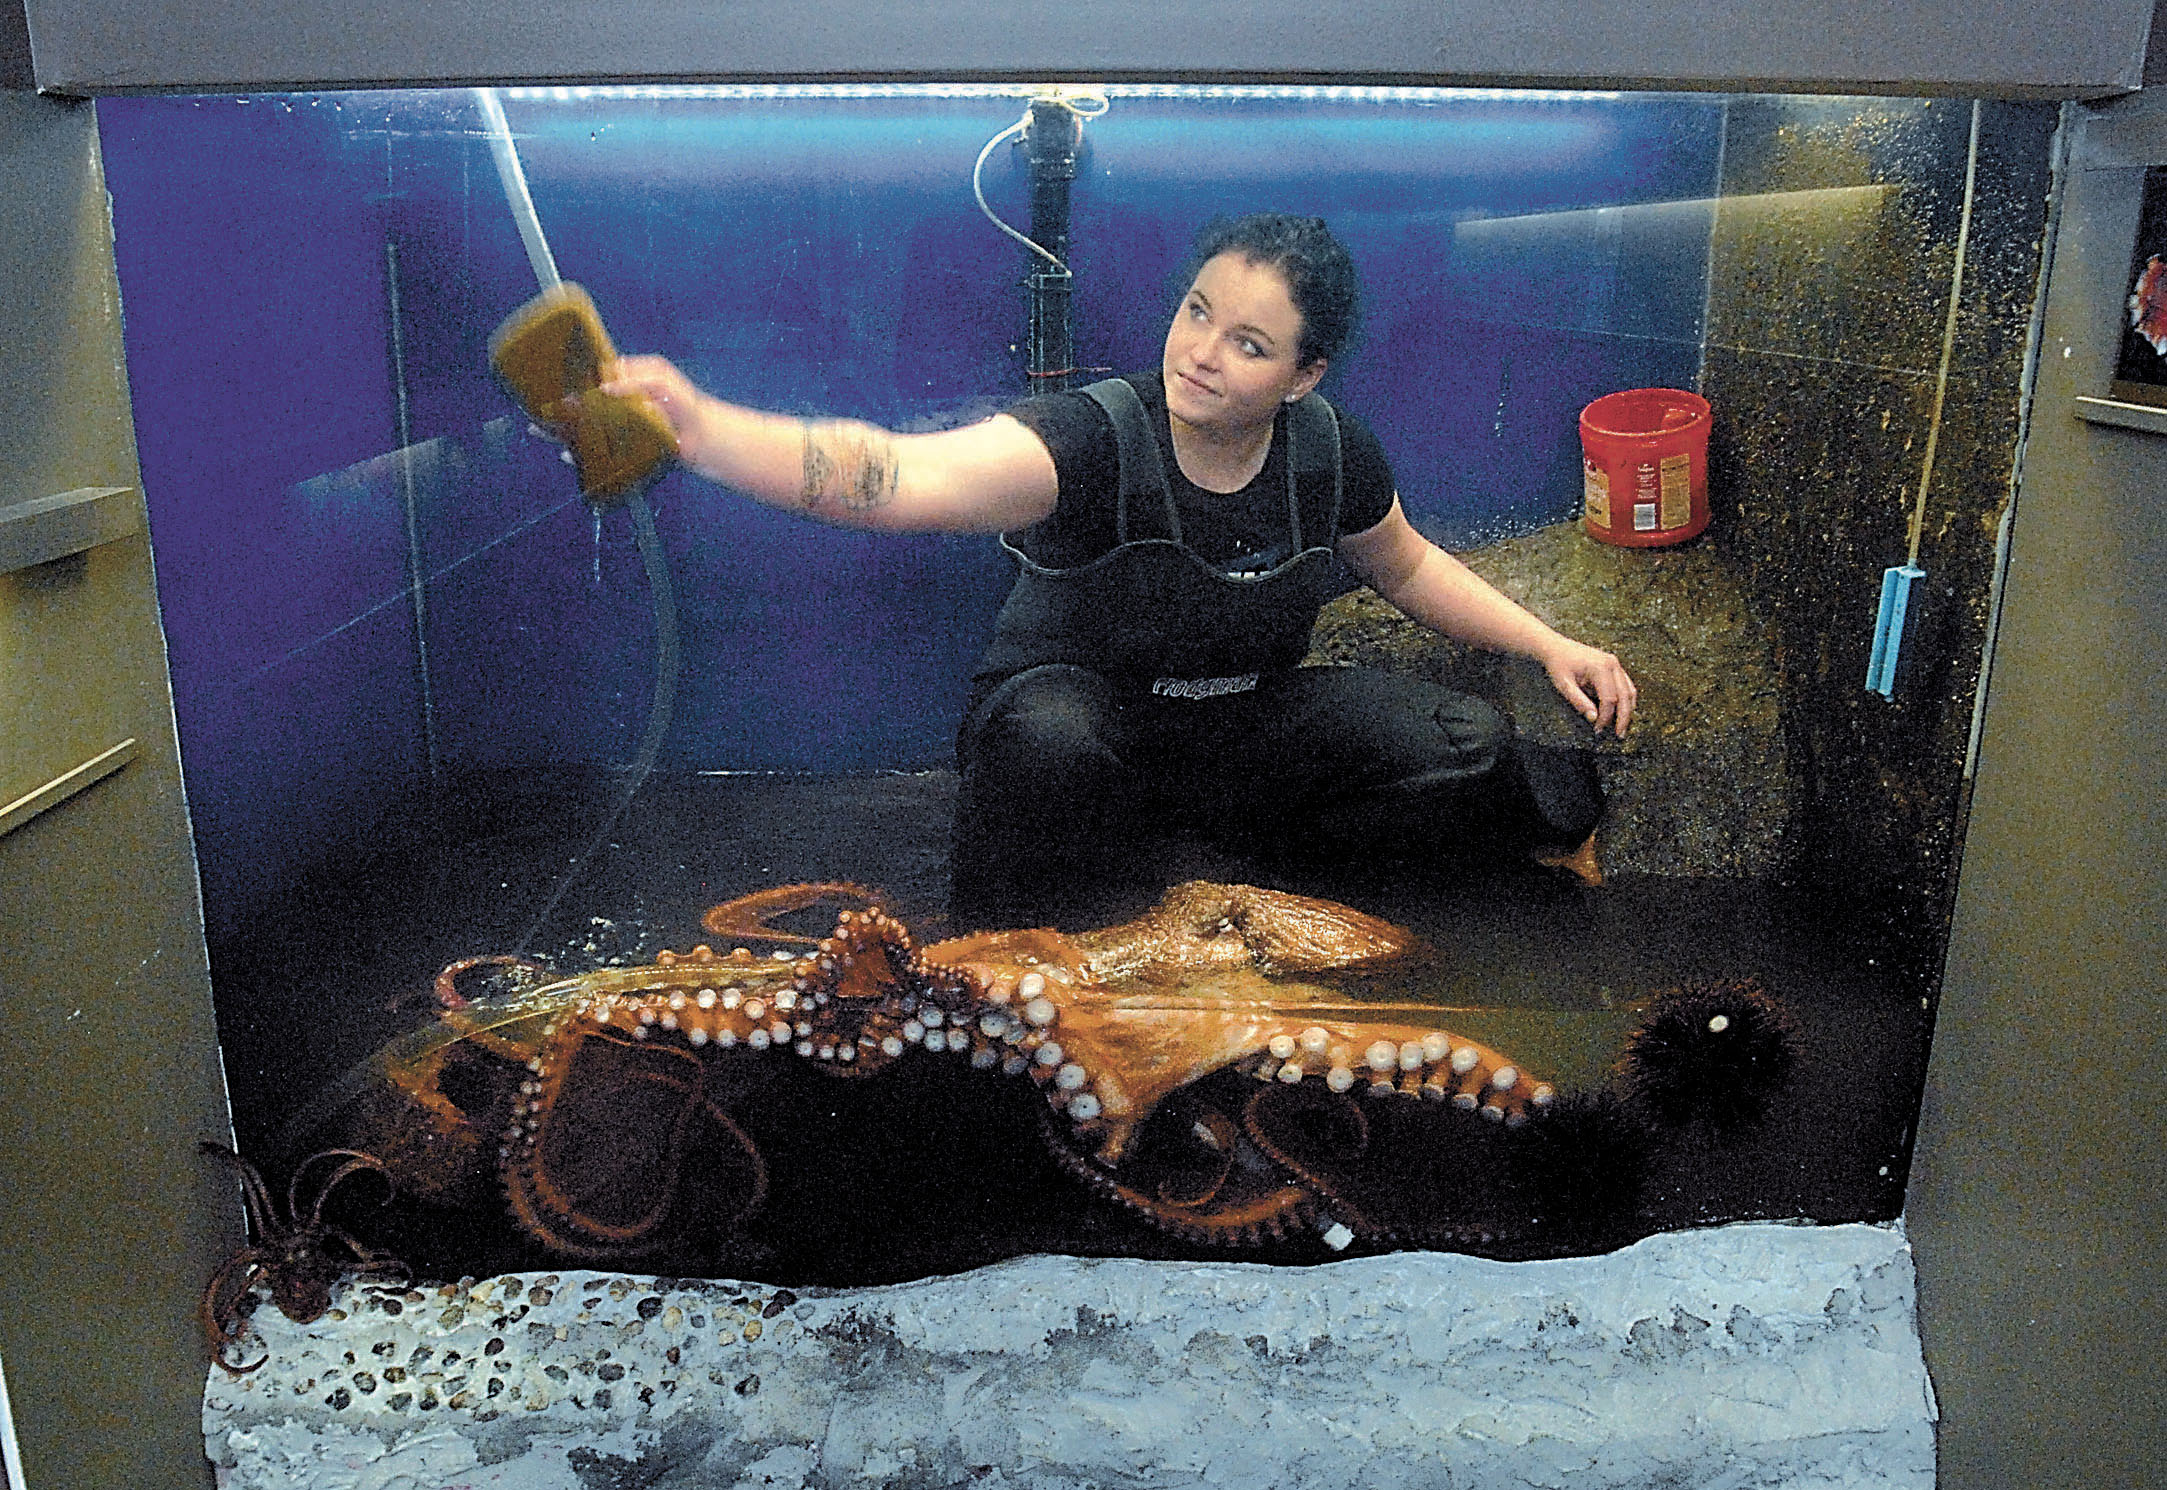 Volunteer Julie Janét cleans the inside of the octopus tank at Feiro Marine Life Center in Port Angeles as Ursula